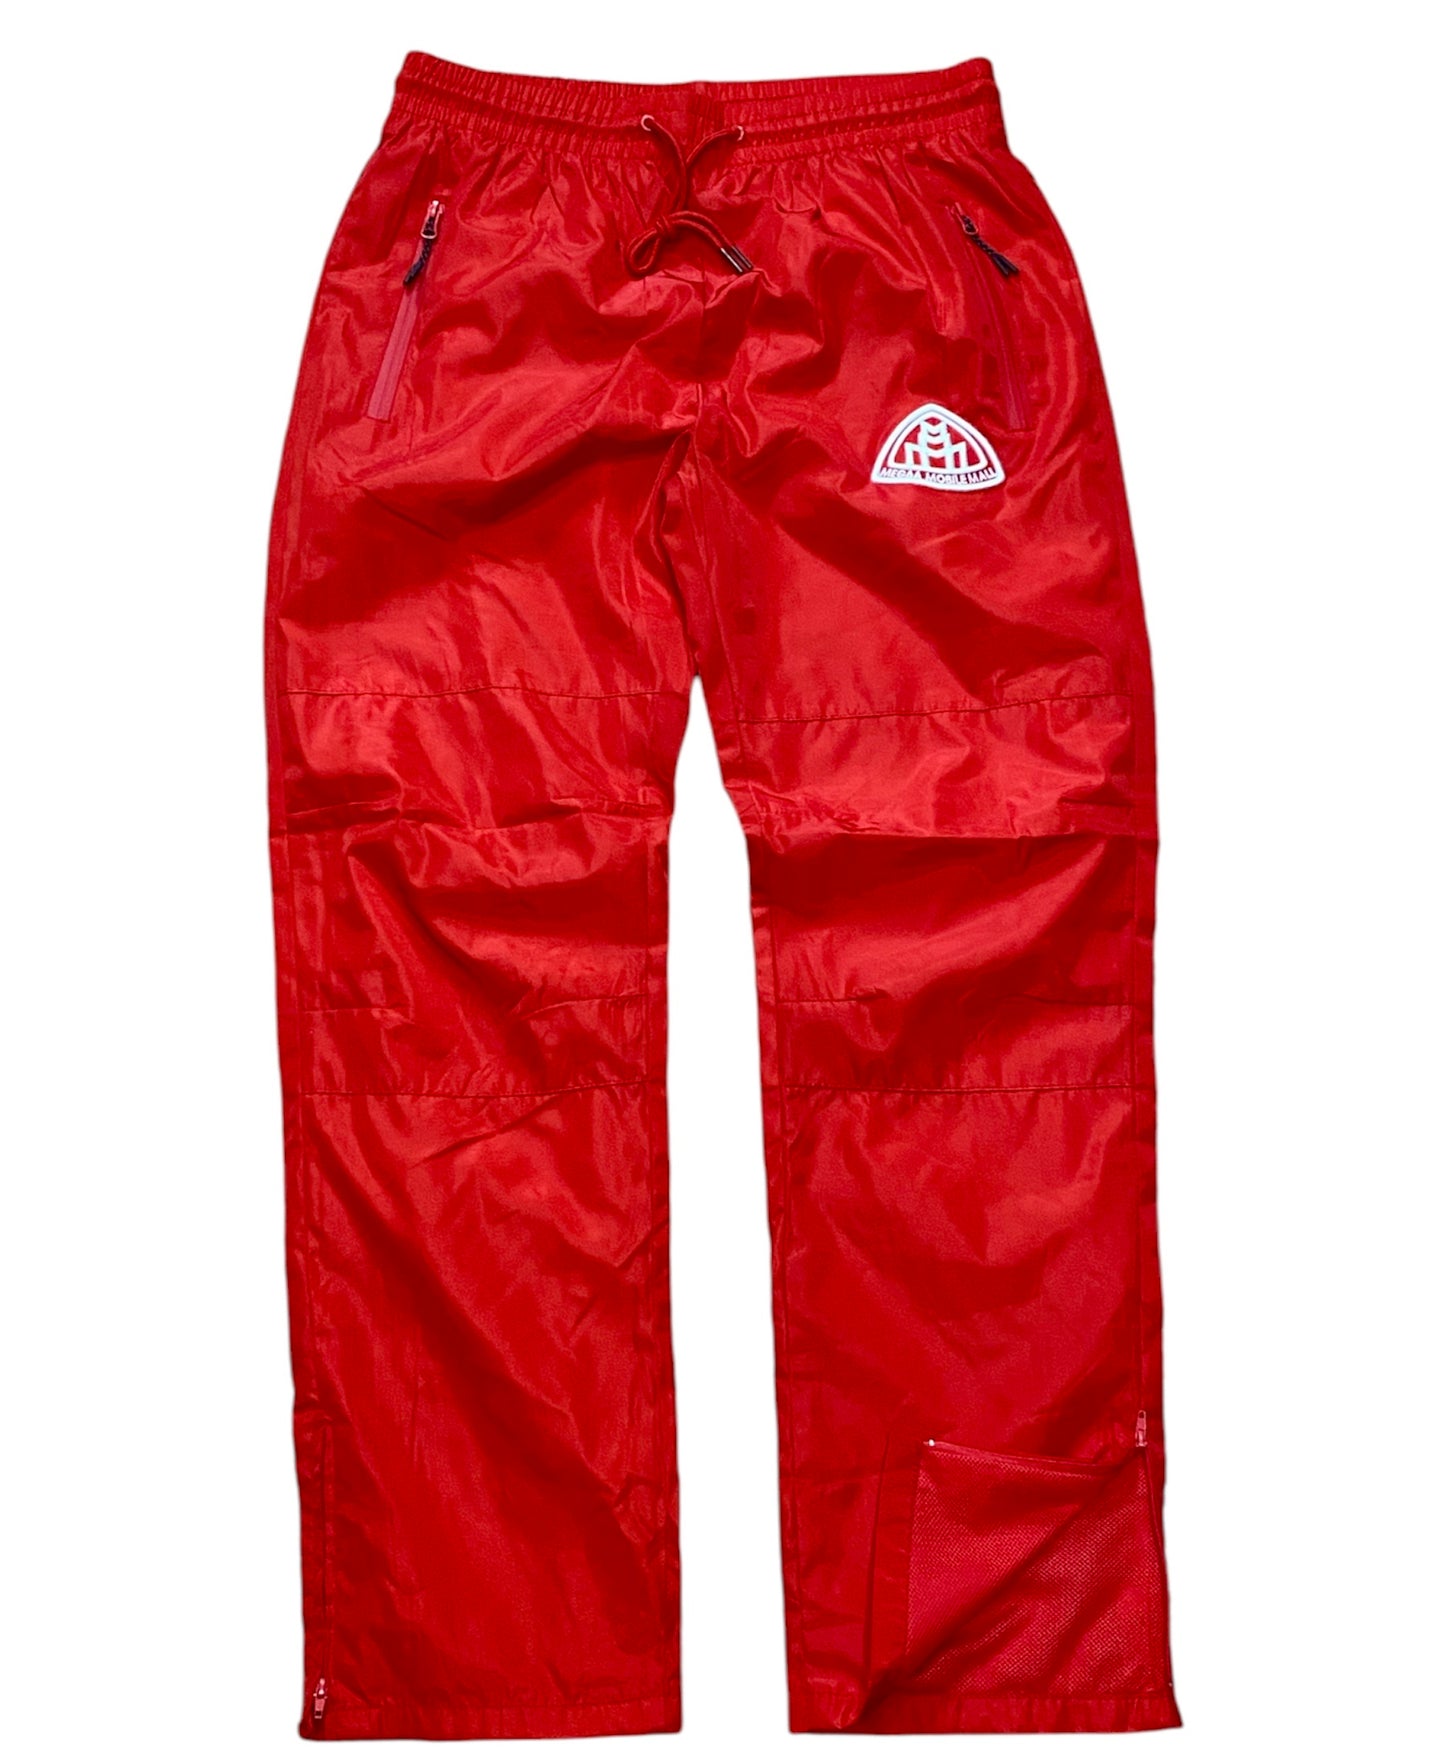 Triple M Red Tracksuit pants front view